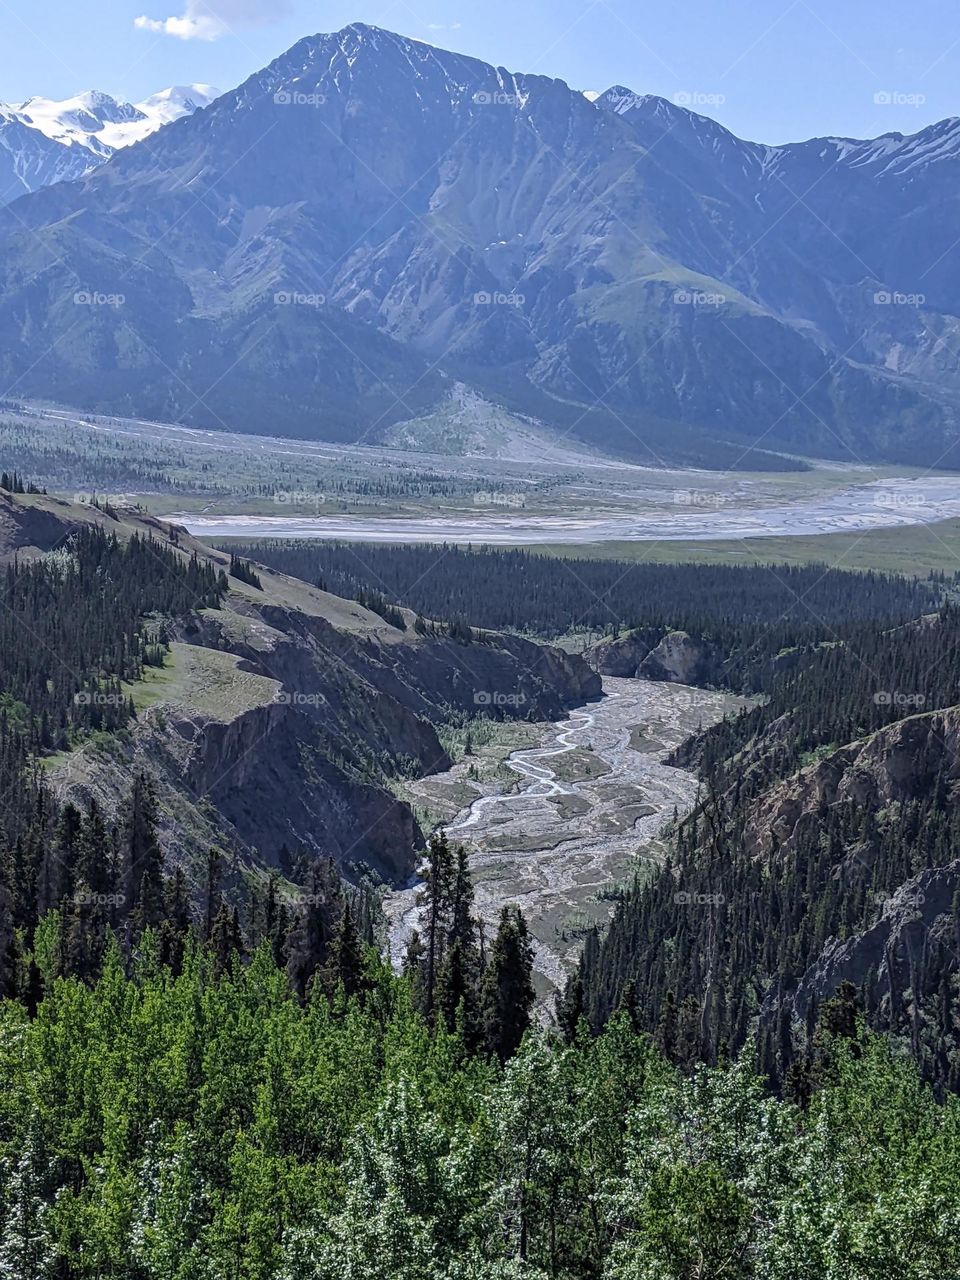 river bed formed by icy meltwater coming from the mountains at Kluane national park in Alaska